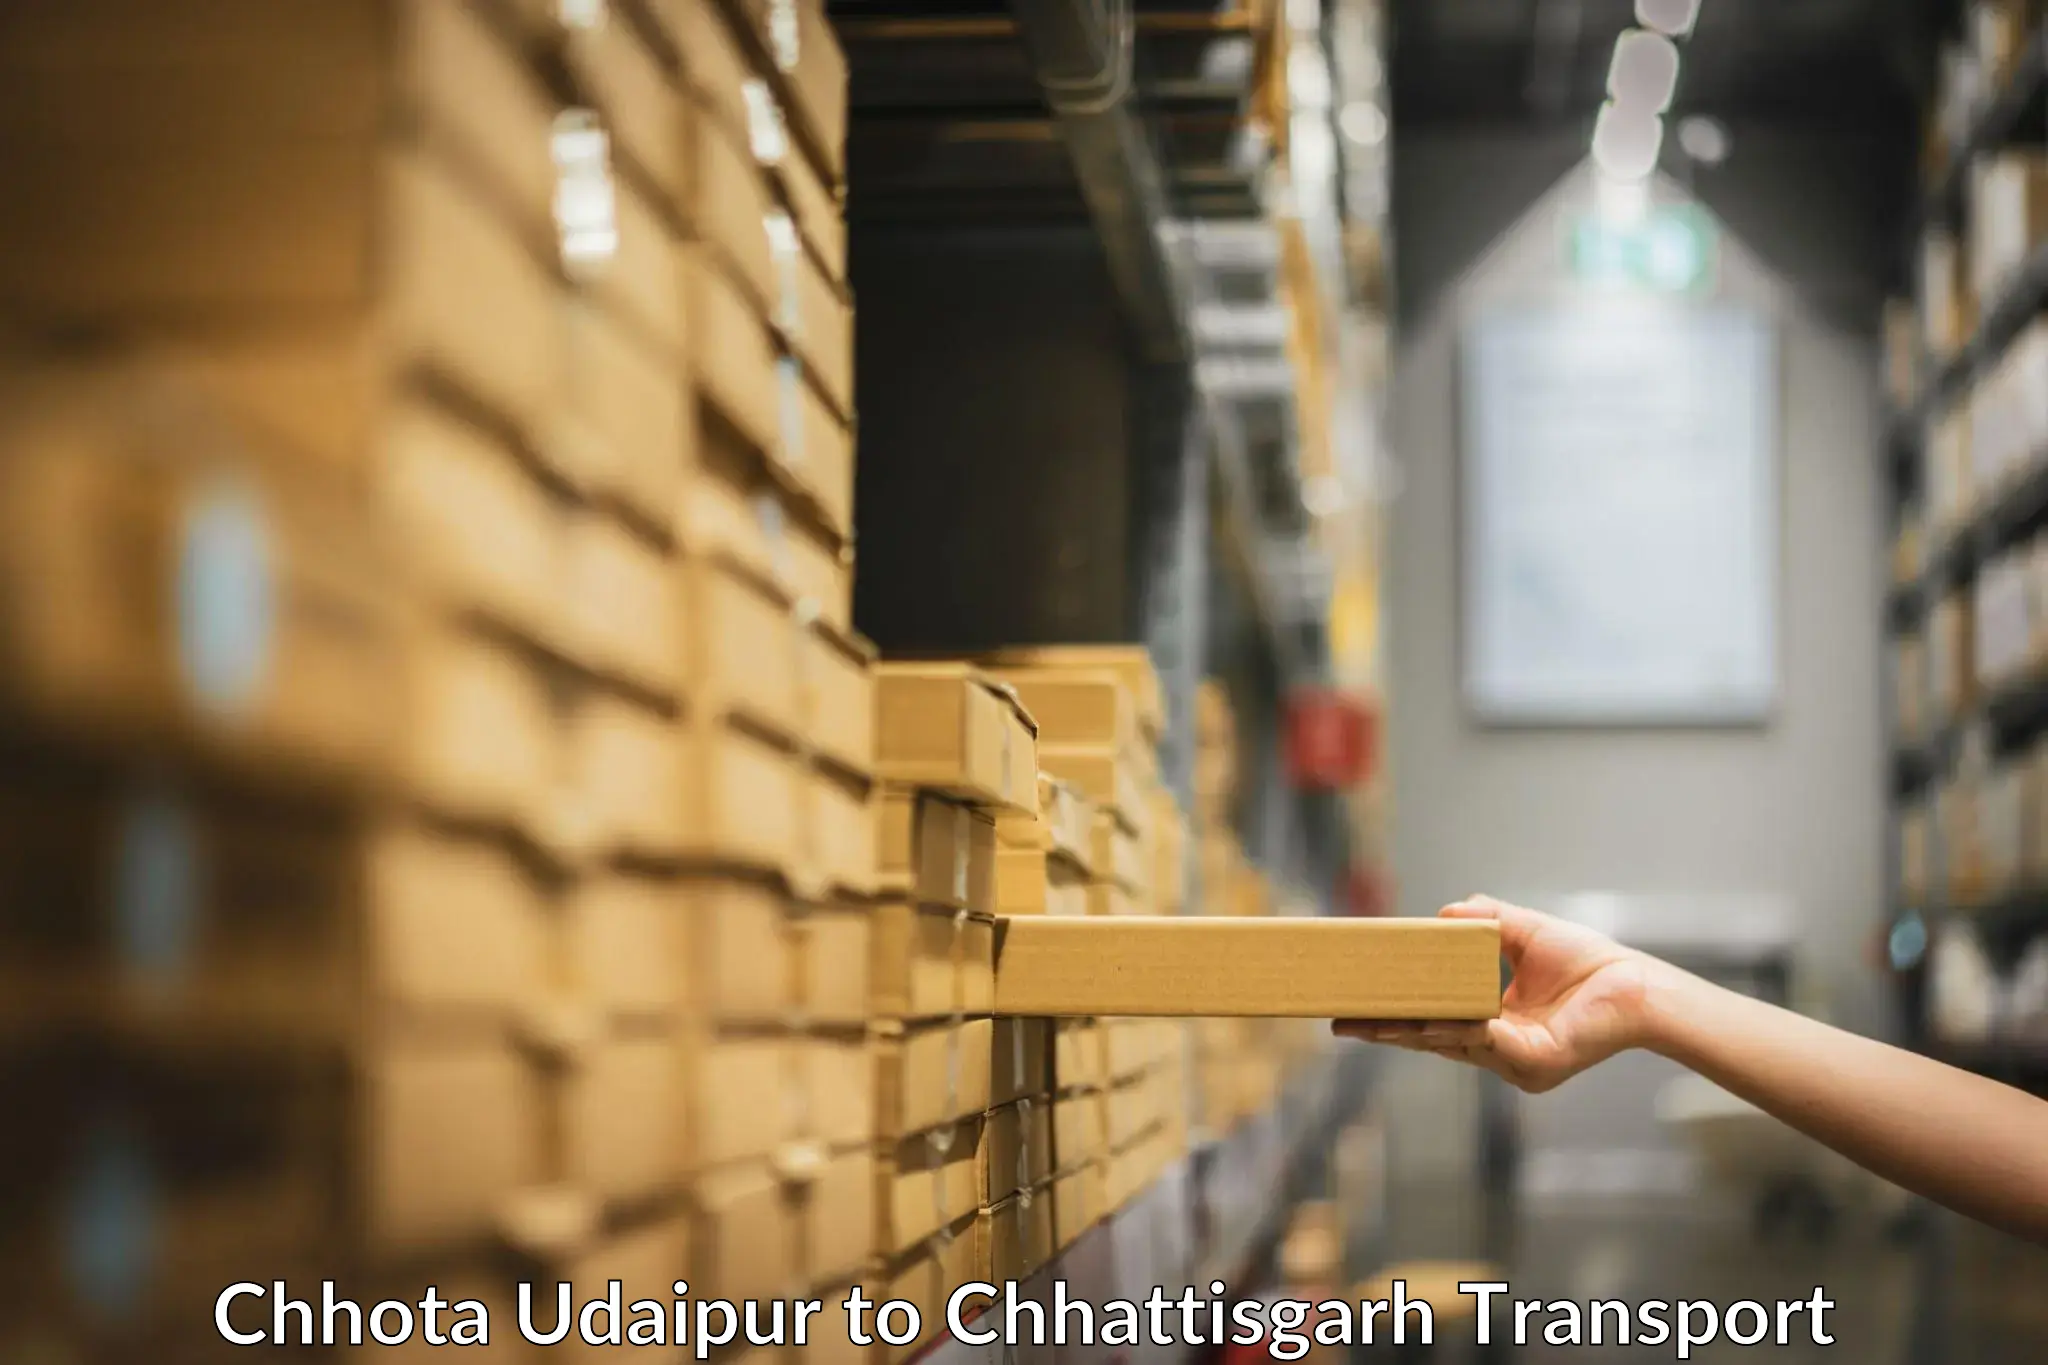 Online transport service Chhota Udaipur to Surguja